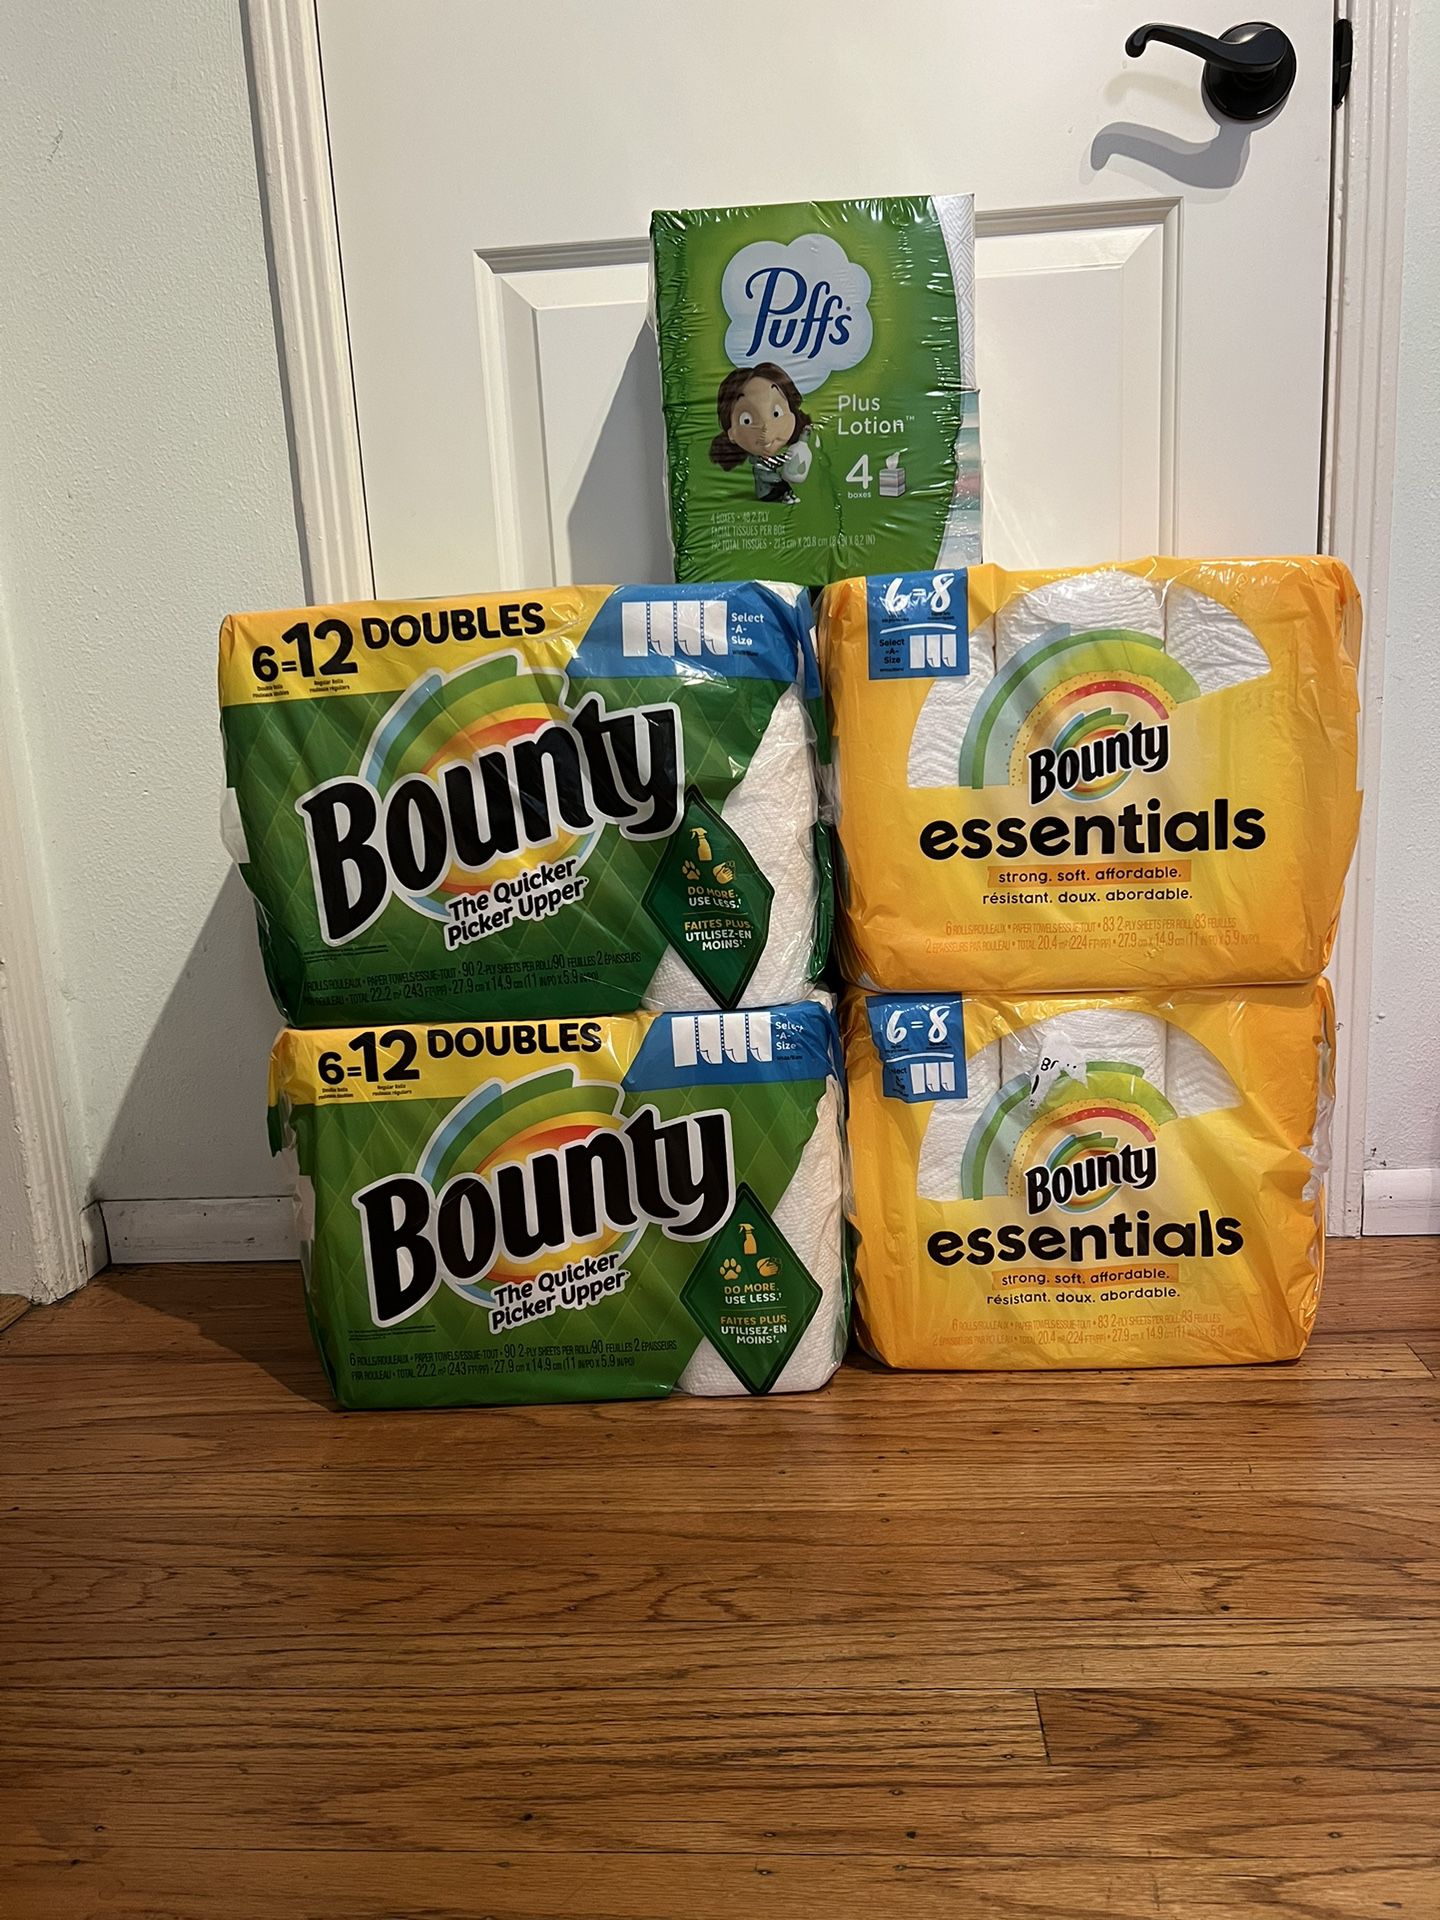 Household Essentials Bundle All For $40